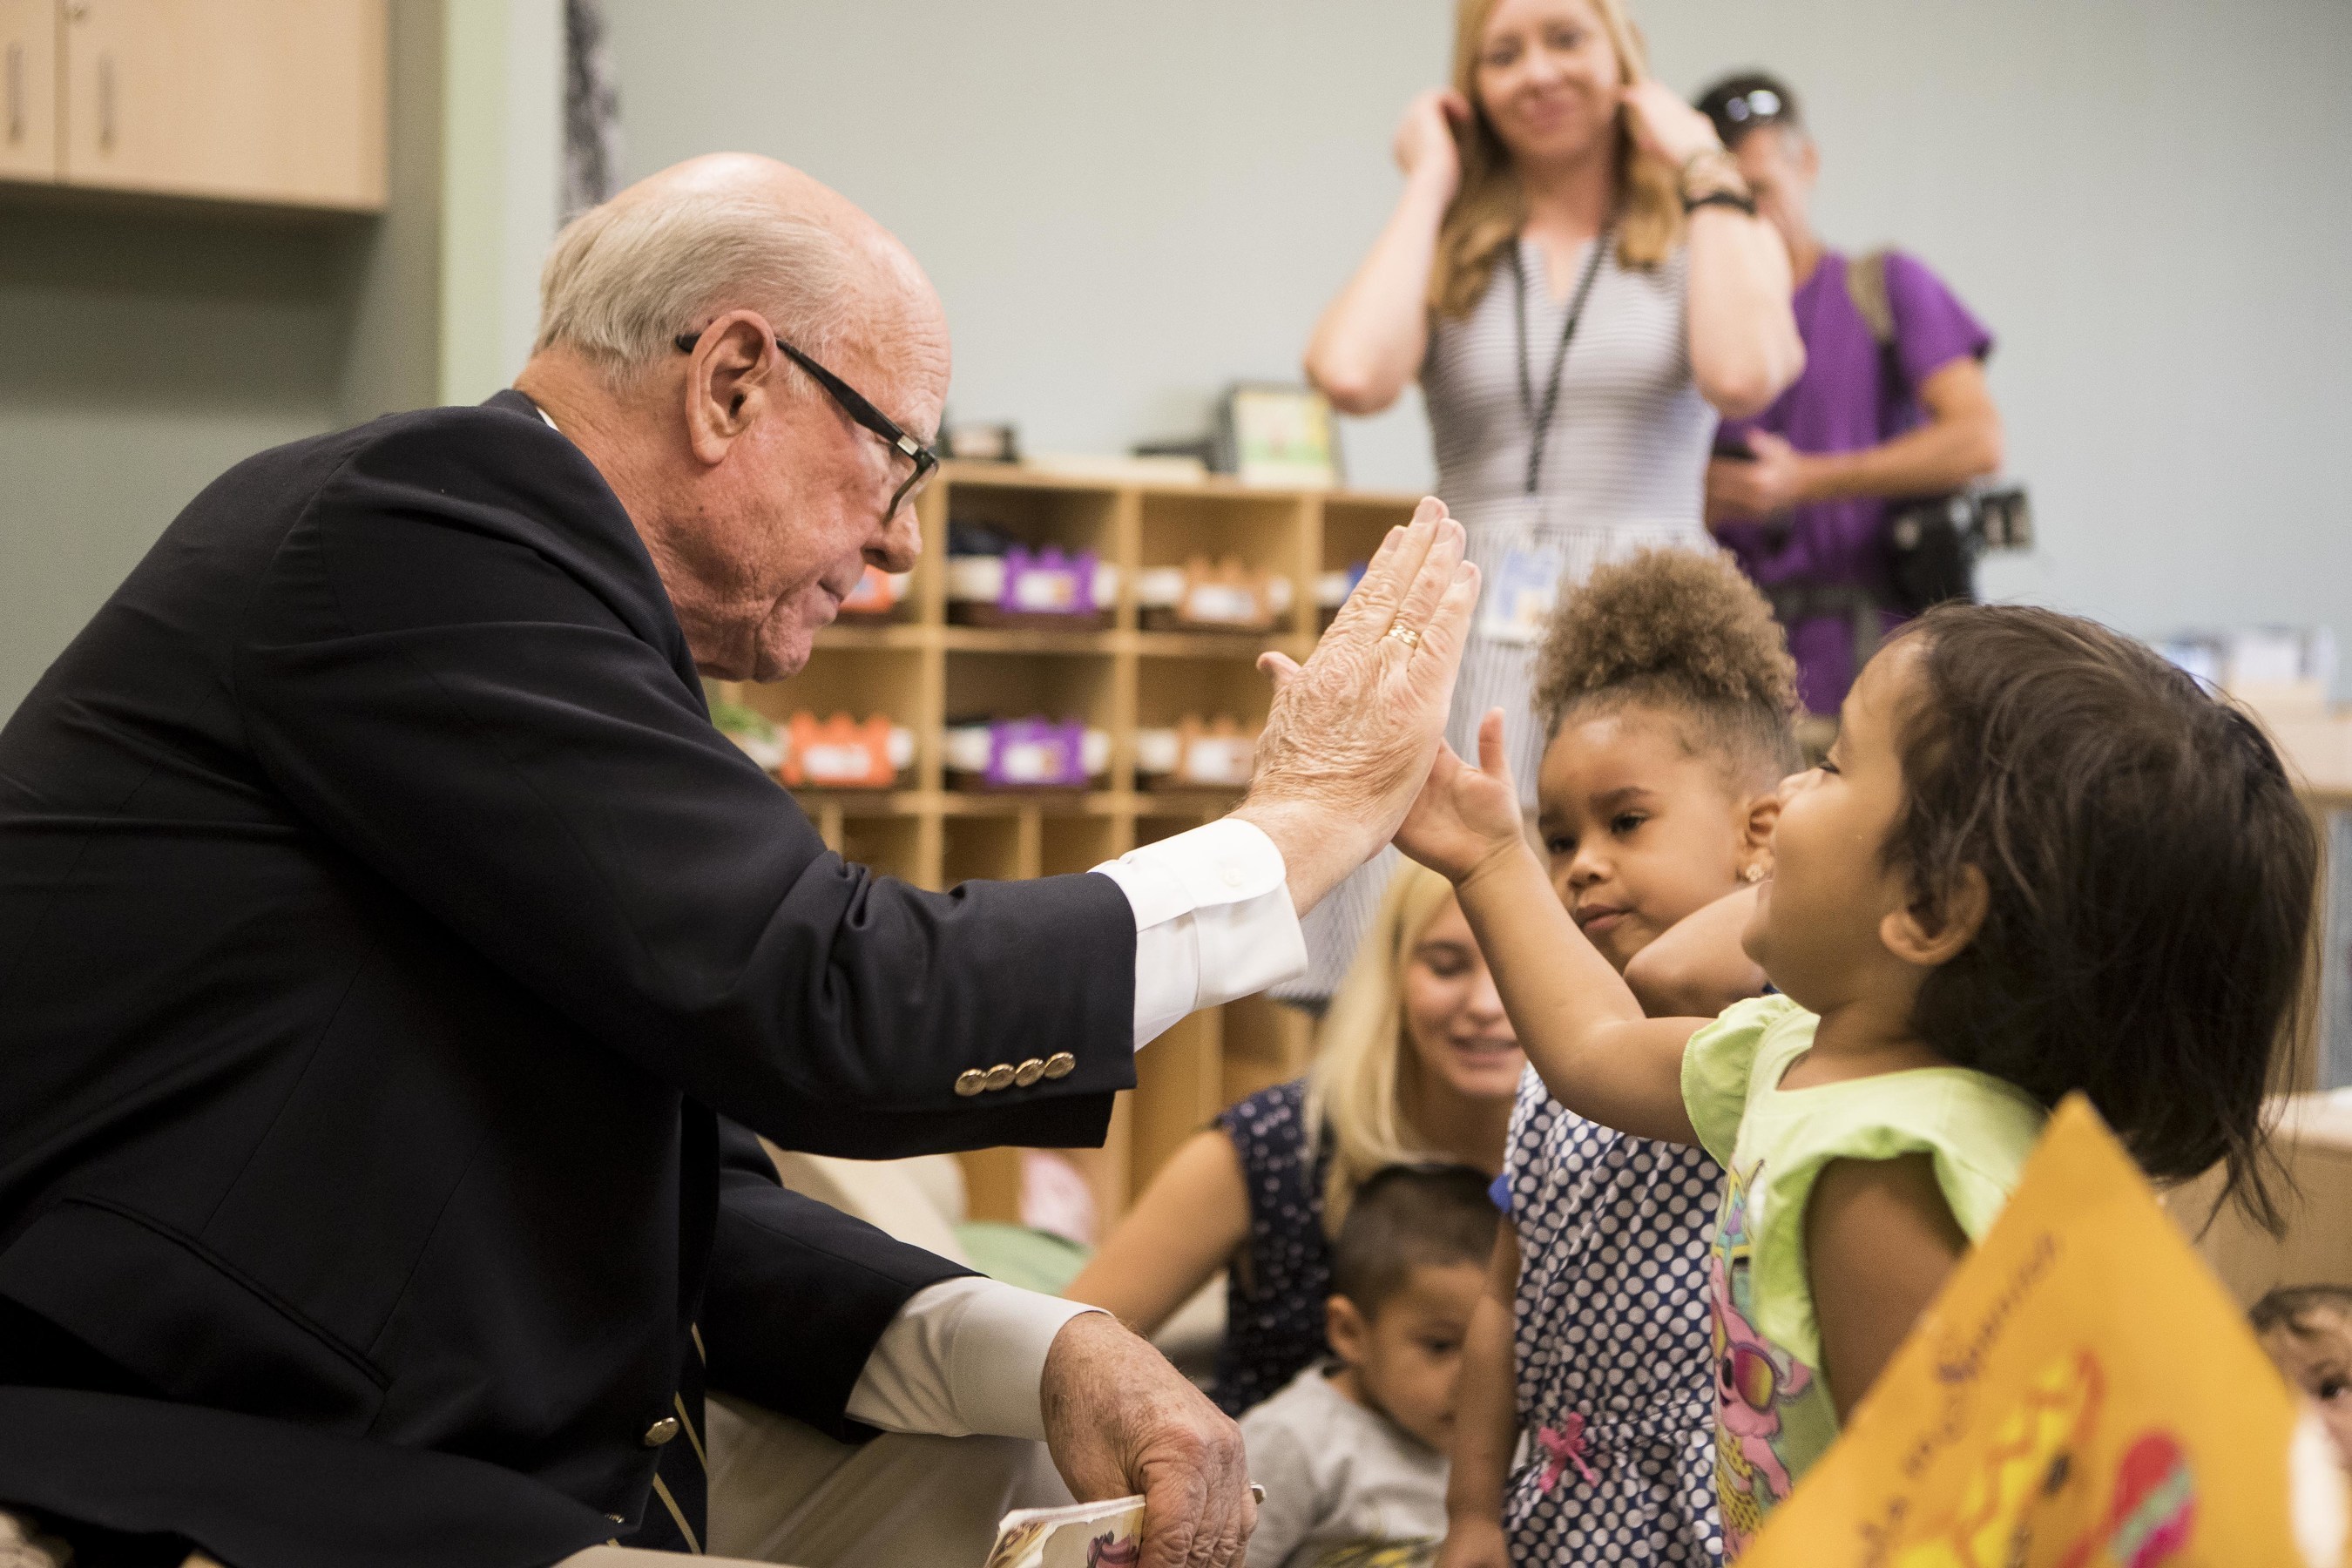 Sen. Pat Roberts (R-KS) reads to preschoolers at Children's Campus of Kansas City (CCKC), where nonprofits offer a continuum of education, family and health services focused on kids from birth to age five. Sen. Roberts met with CCKC staff to learn why facilities tailored to young learners are so important to their future, and why programs like the federal New Markets Tax Credit are so critical to building them.